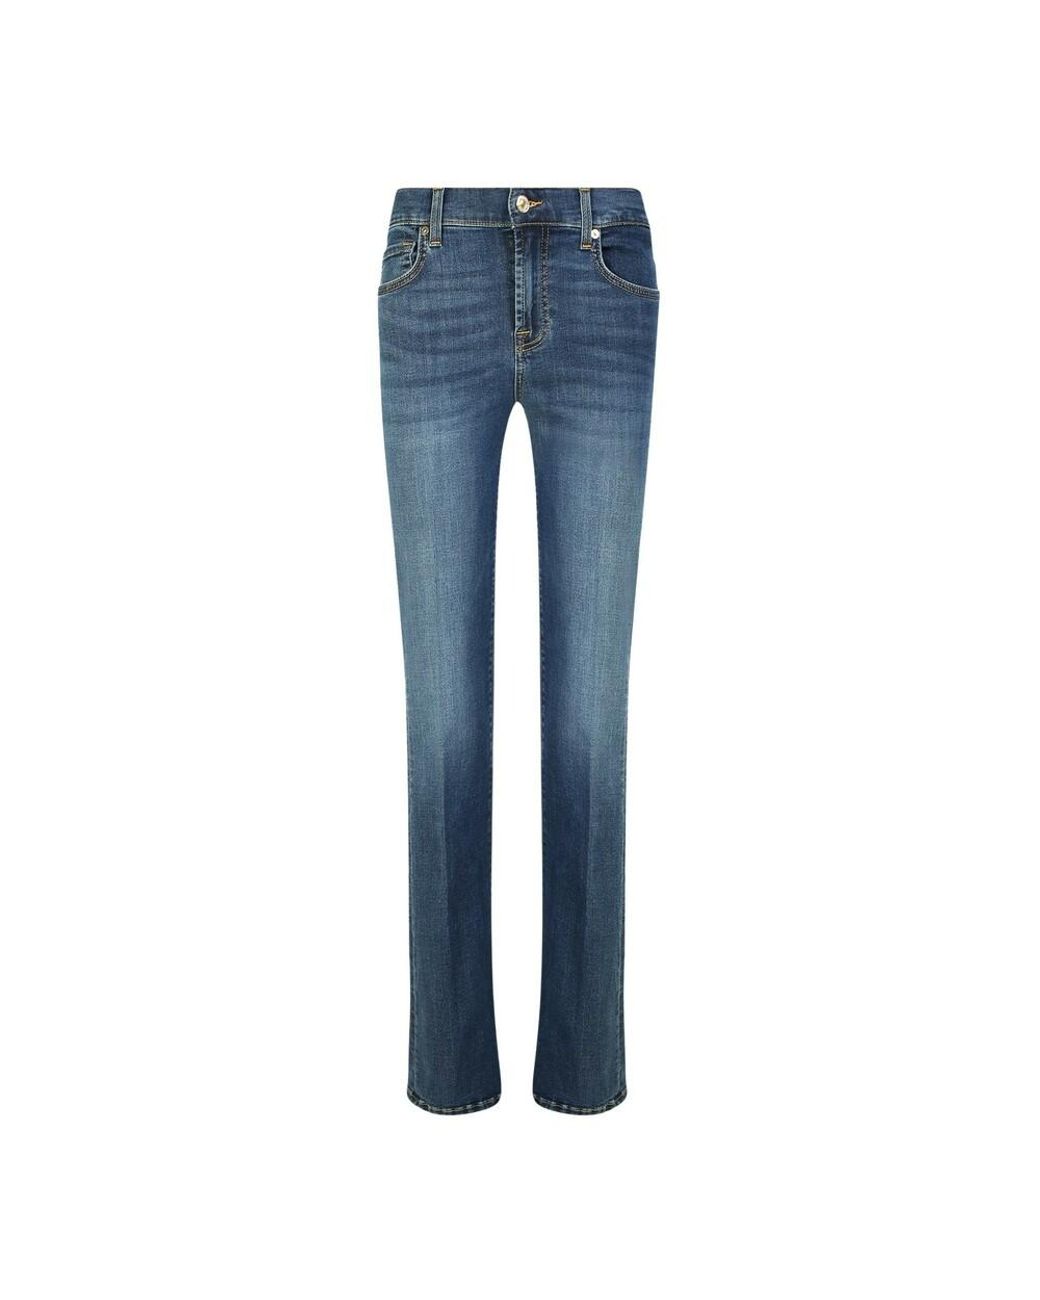 Mode Jeans Jeans taille haute 7 For All Mankind Jeans taille haute bleu style d\u00e9contract\u00e9 